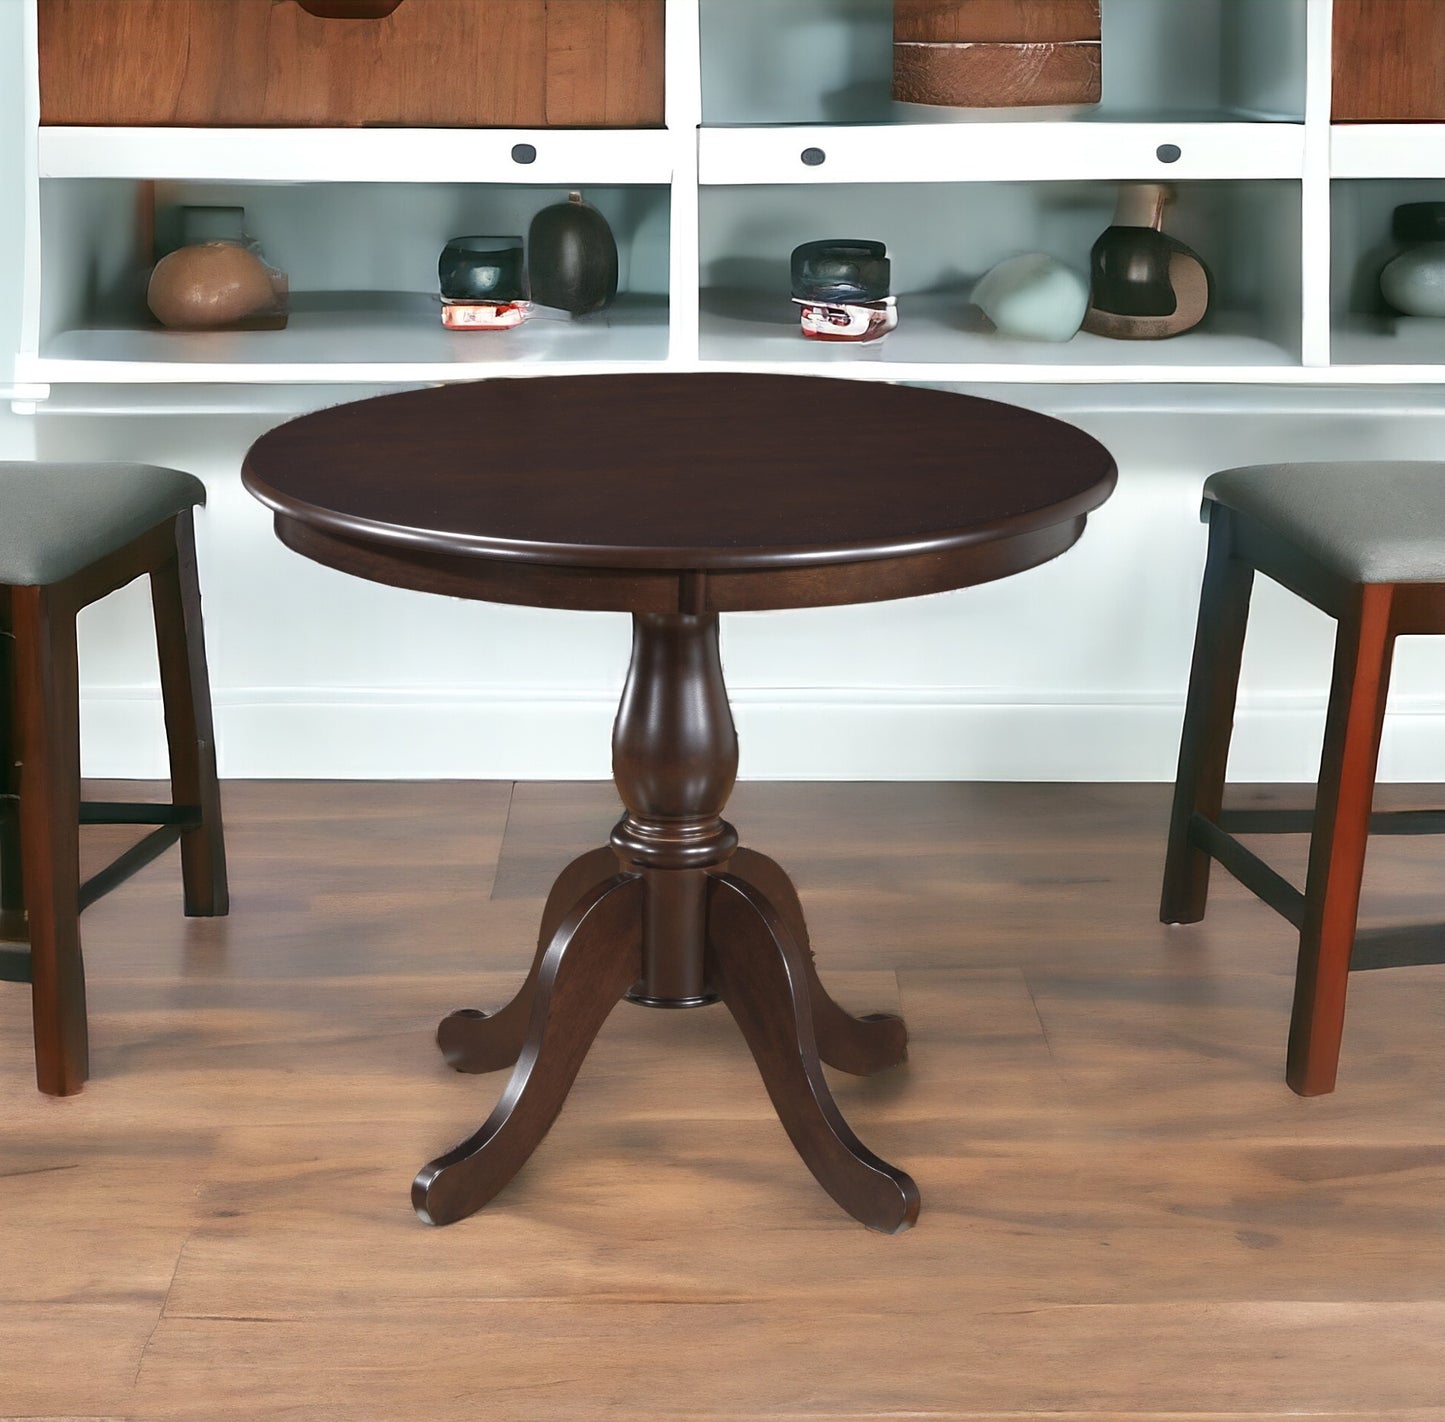 36" Espresso Rounded Solid Manufactured Wood And Solid Wood Pedestal Base Dining Table